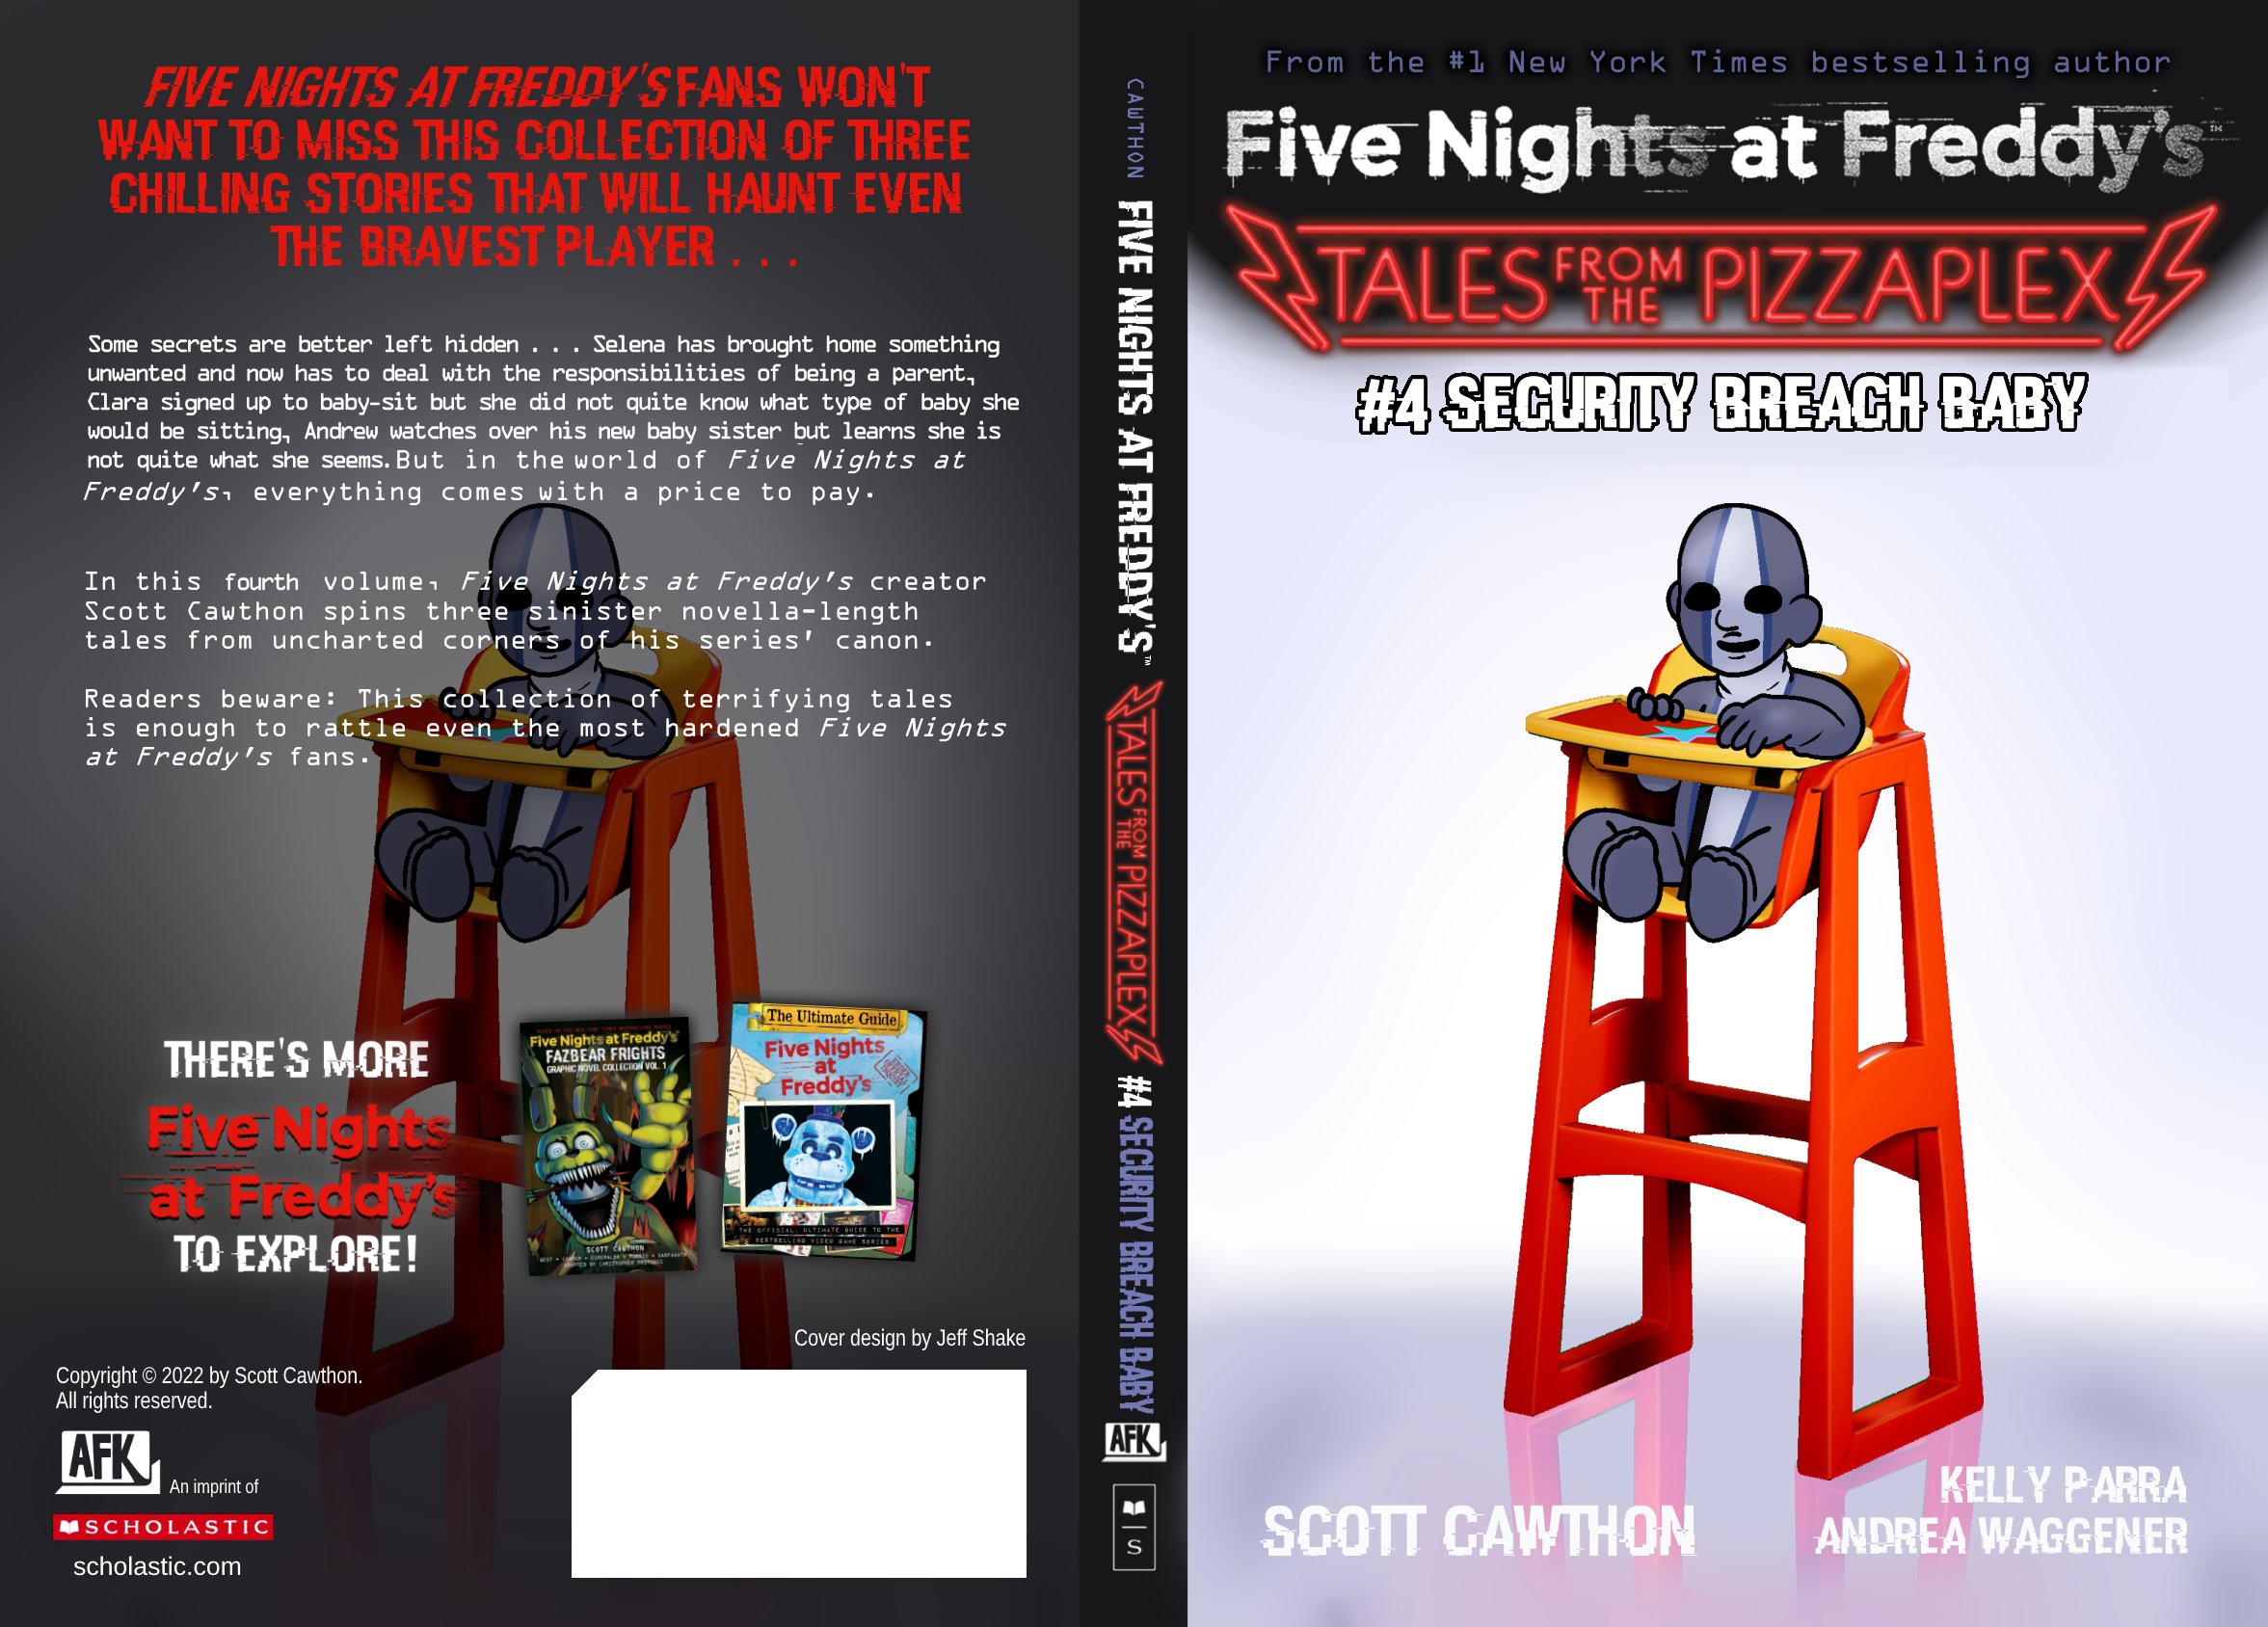 FNAF4 Offically Explained by new tales from the pizzaplex book 8 #FNAF, Fnaf  4